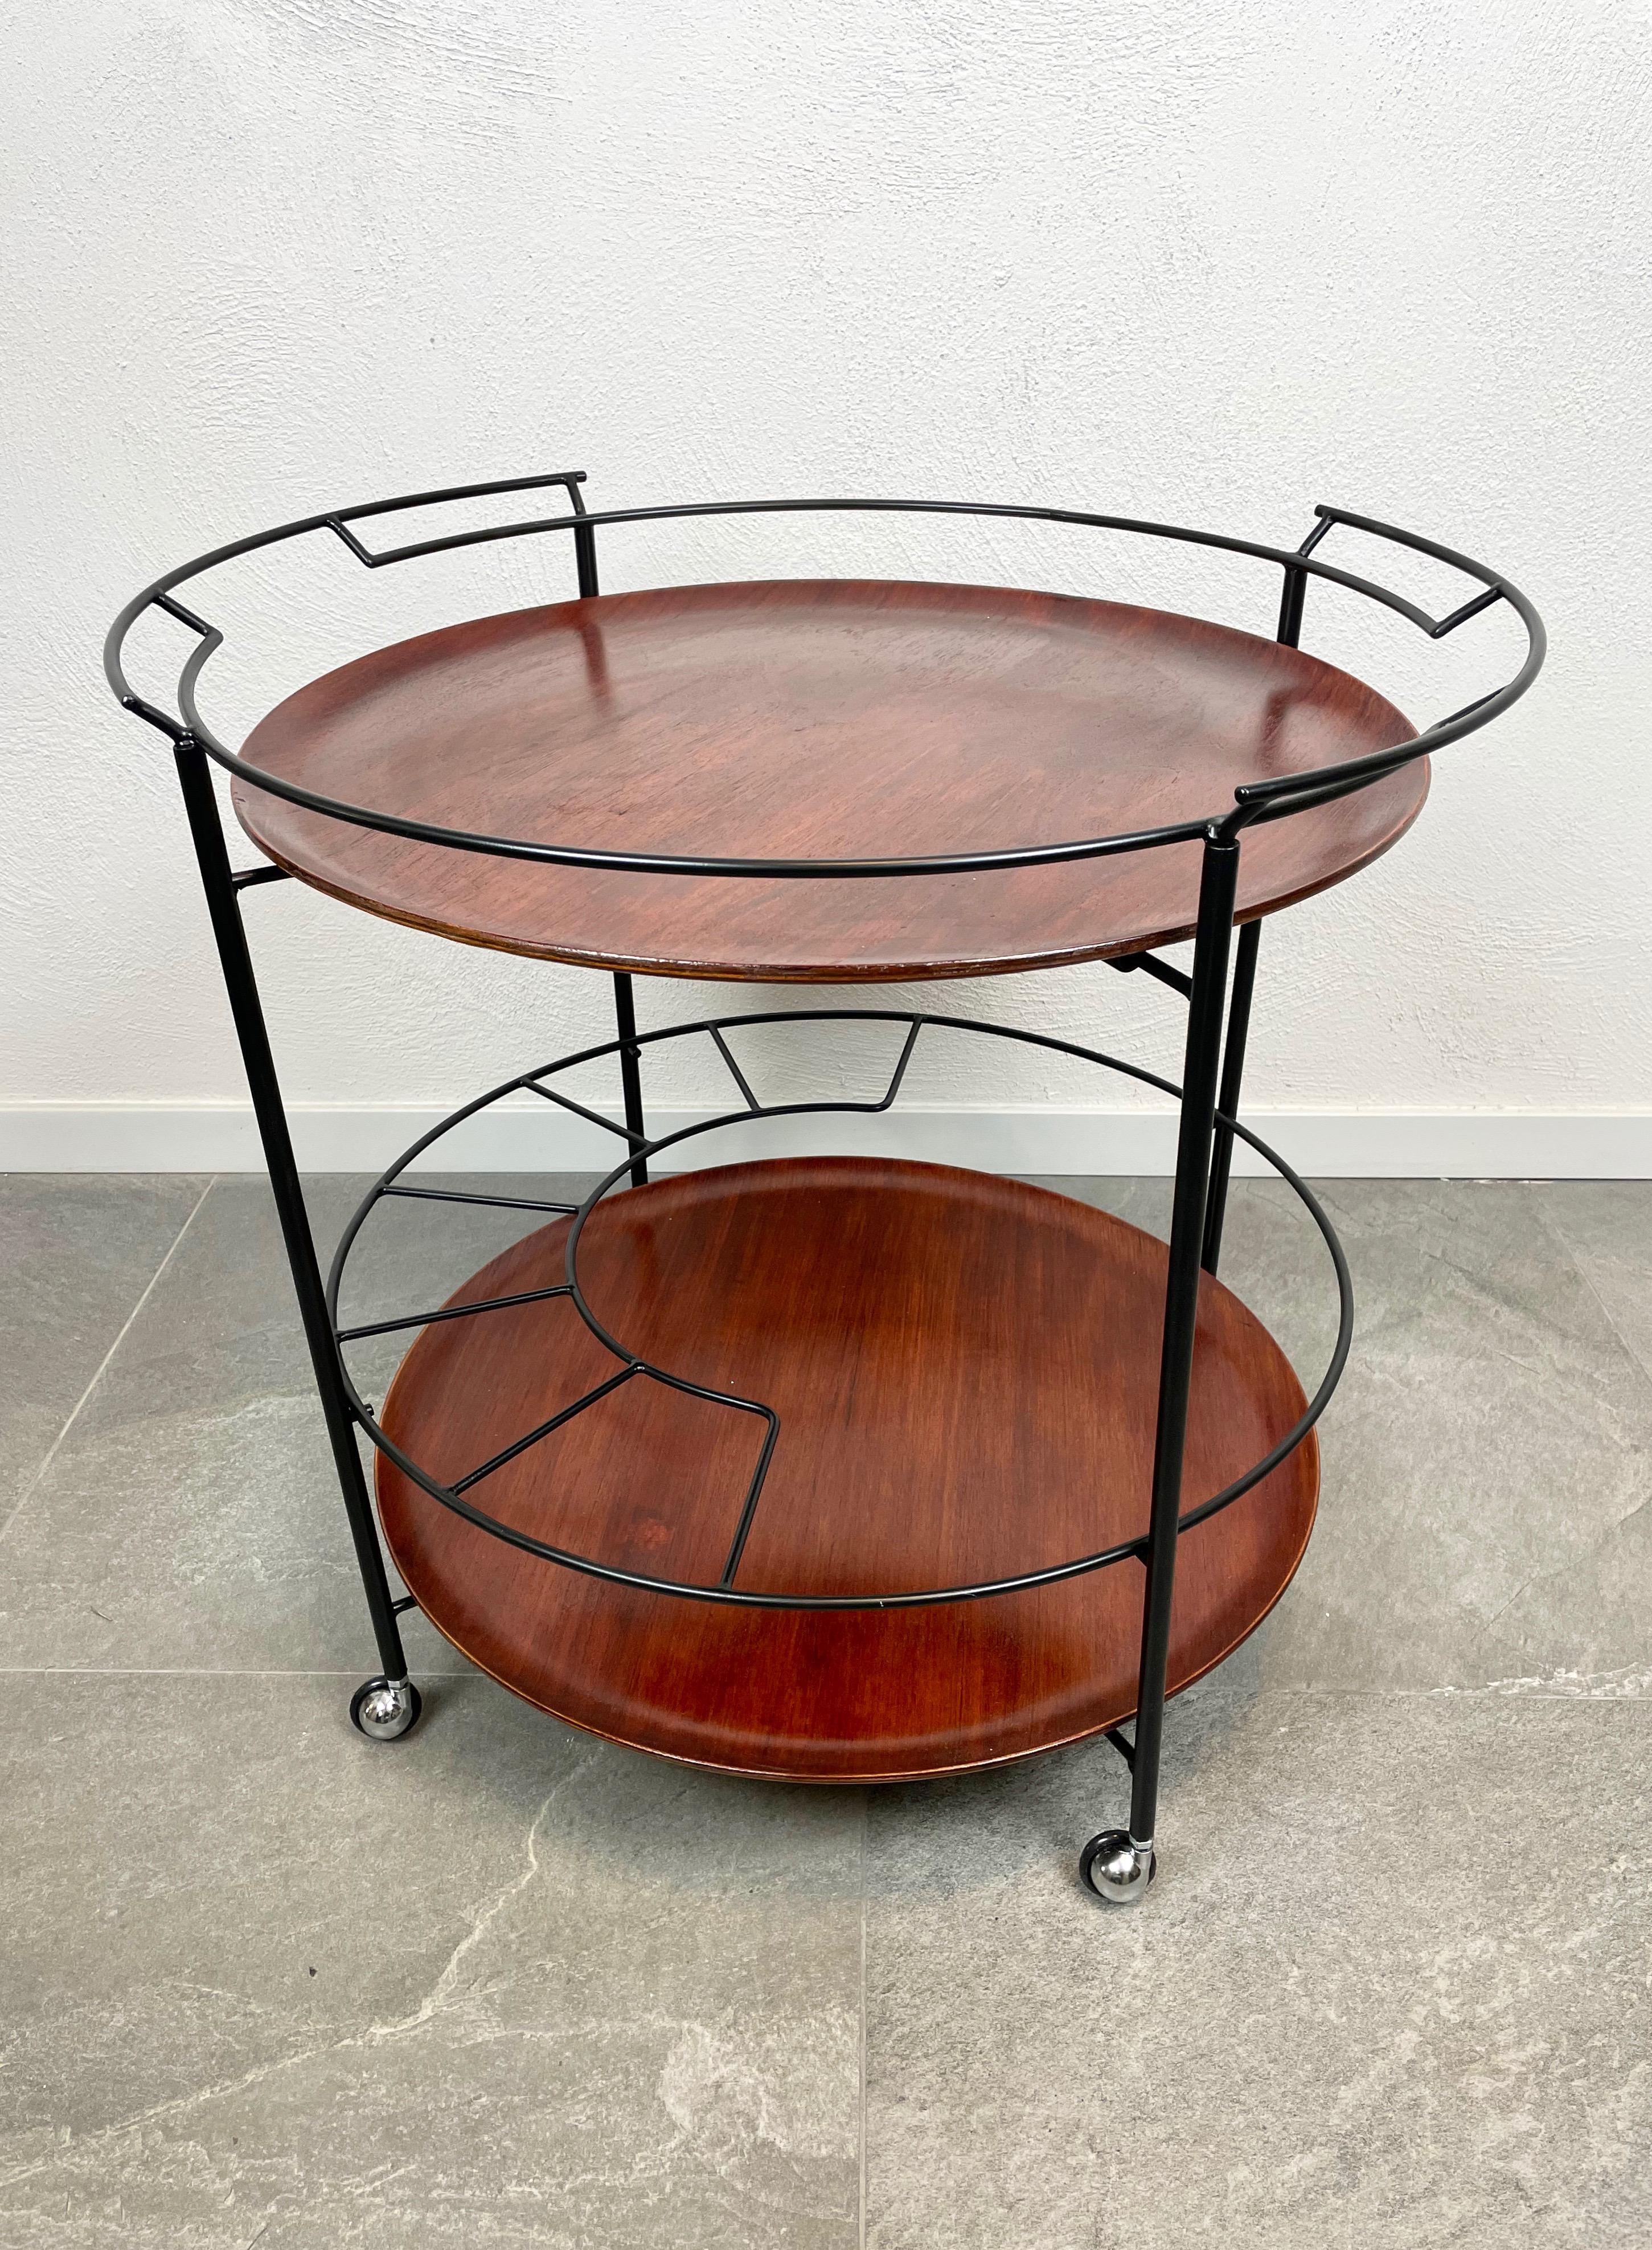 Serving cart tray composed of two removable teak shelves and metal structure painted black which also serves as bottle holder. Made in Italy in the 1960s.